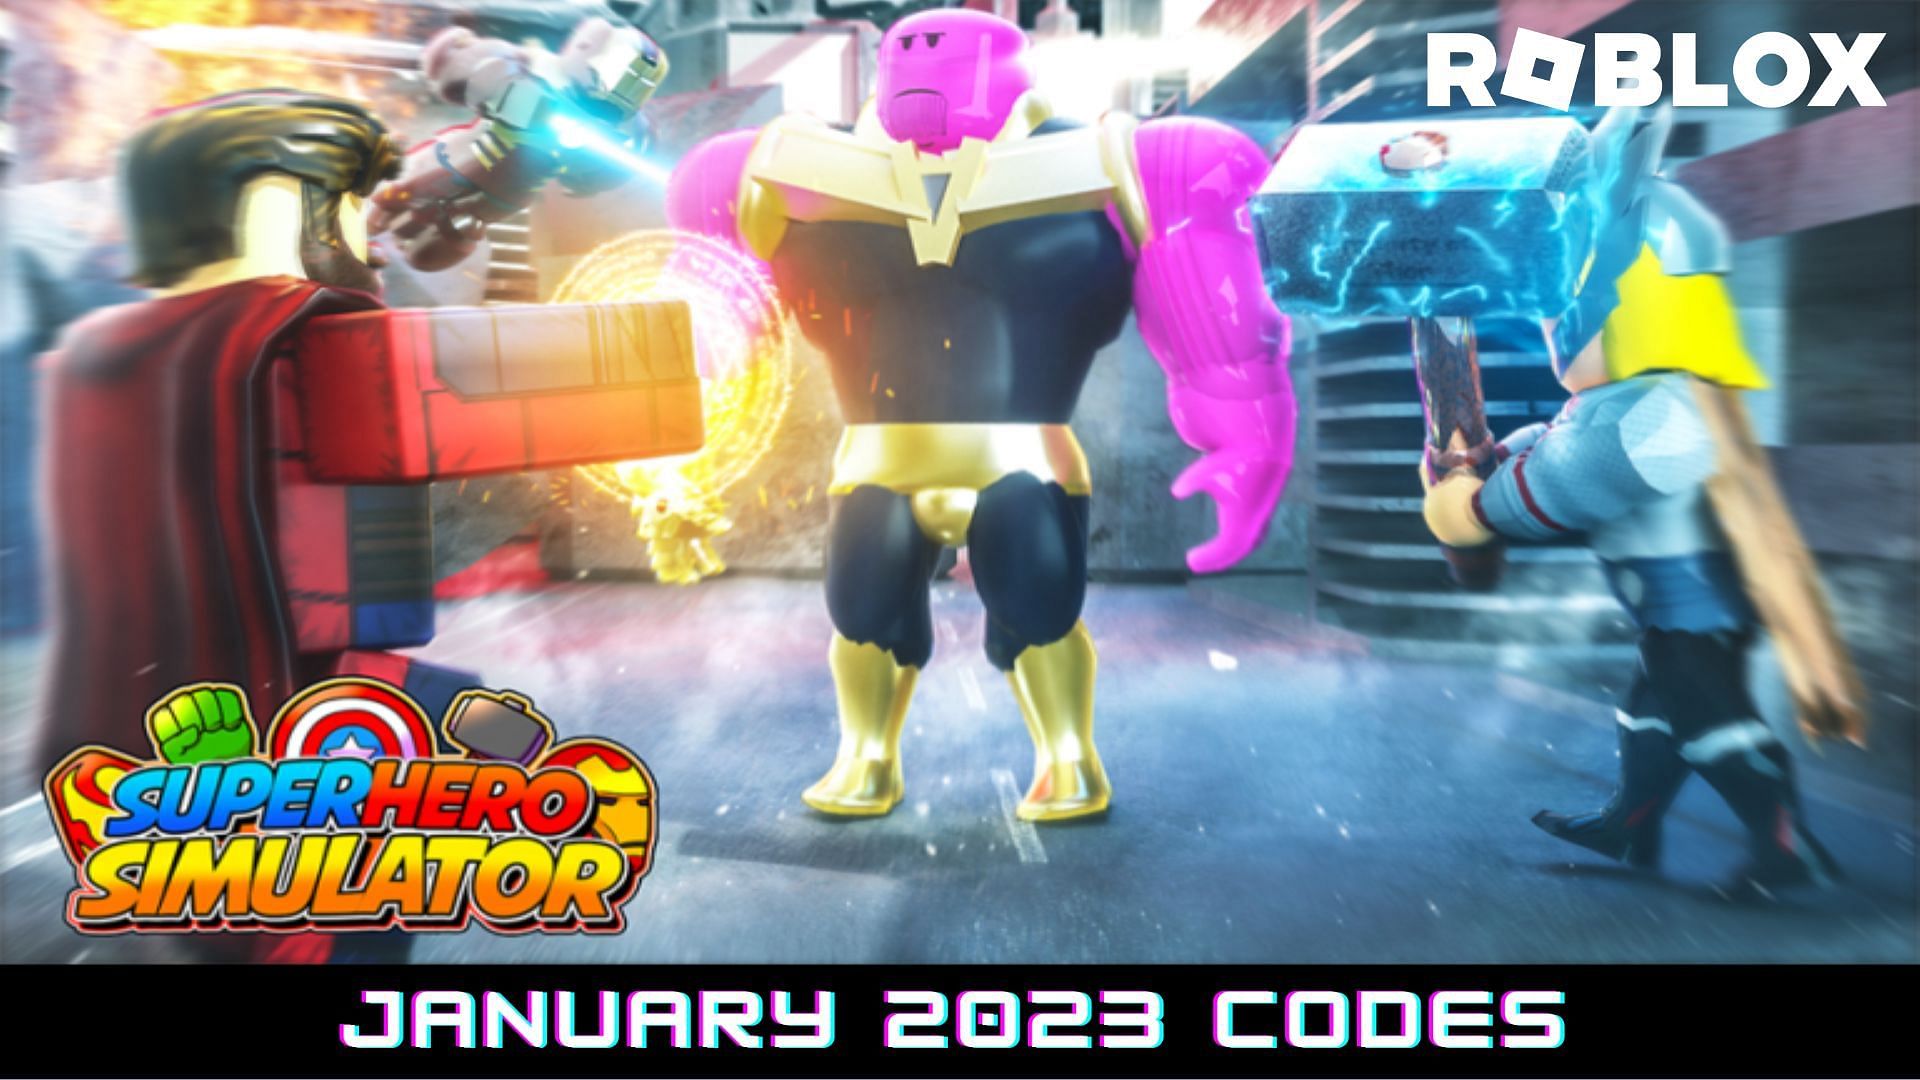 Roblox Anime Souls Simulator Codes (January 2023) in 2023